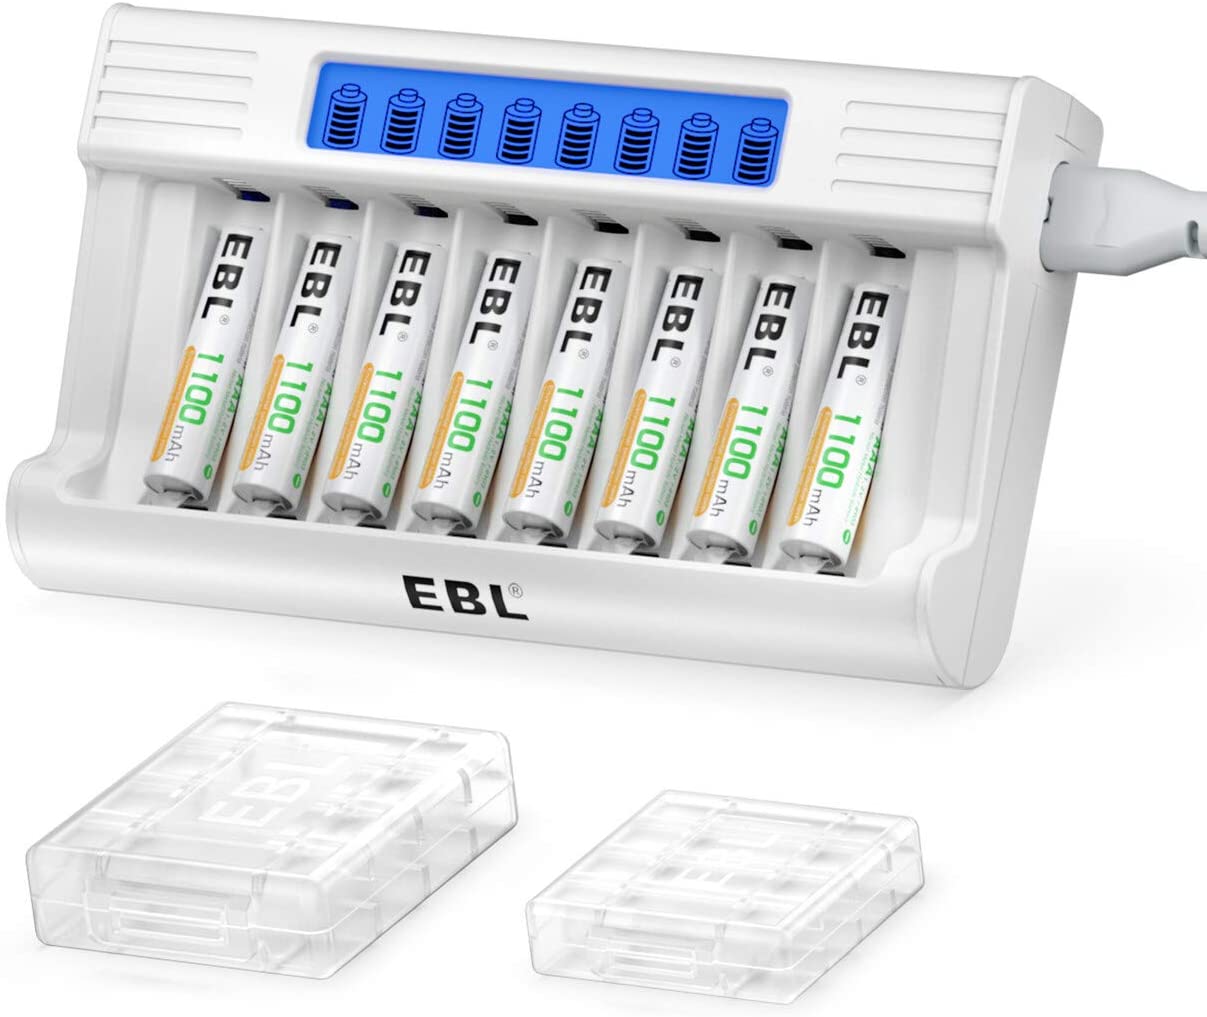 EBL 1100mAh Rechargeable AAA Batteries 8 Pack and 8 Slots LCD AA AAA Battery Charger $12.99 at Amazon